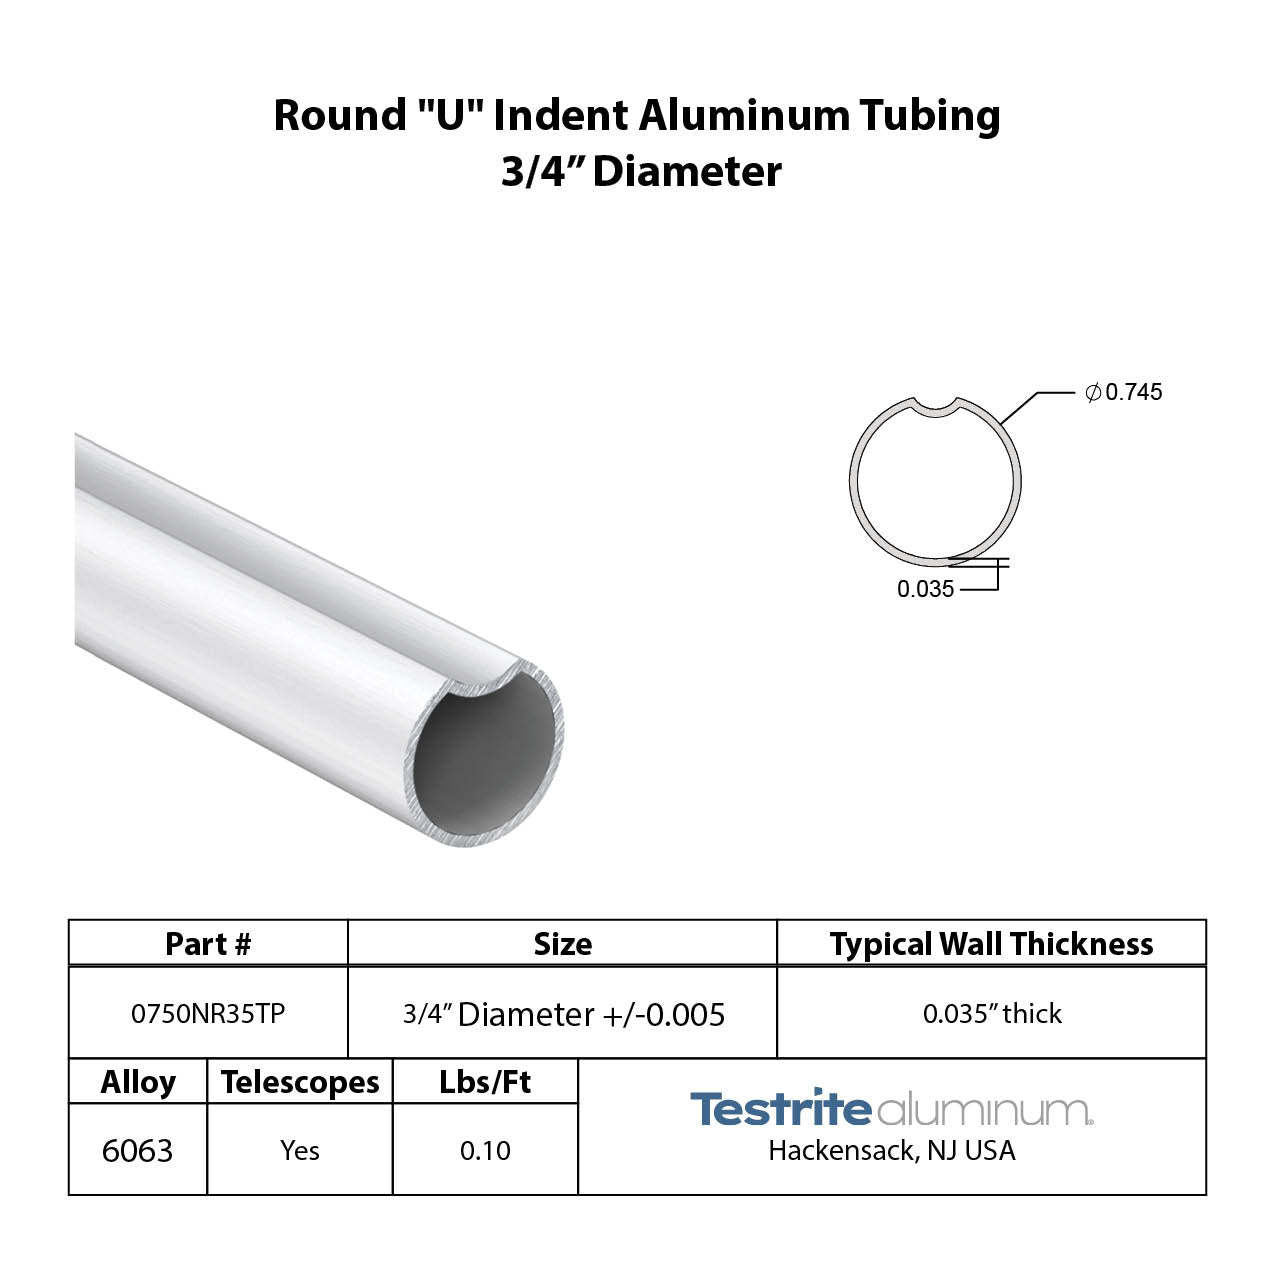 Specification sheet for 3/4" OD round U indent aluminum tube index key aluminum tubing .75 in diameter spec sheet thin wall 0750NR35TP